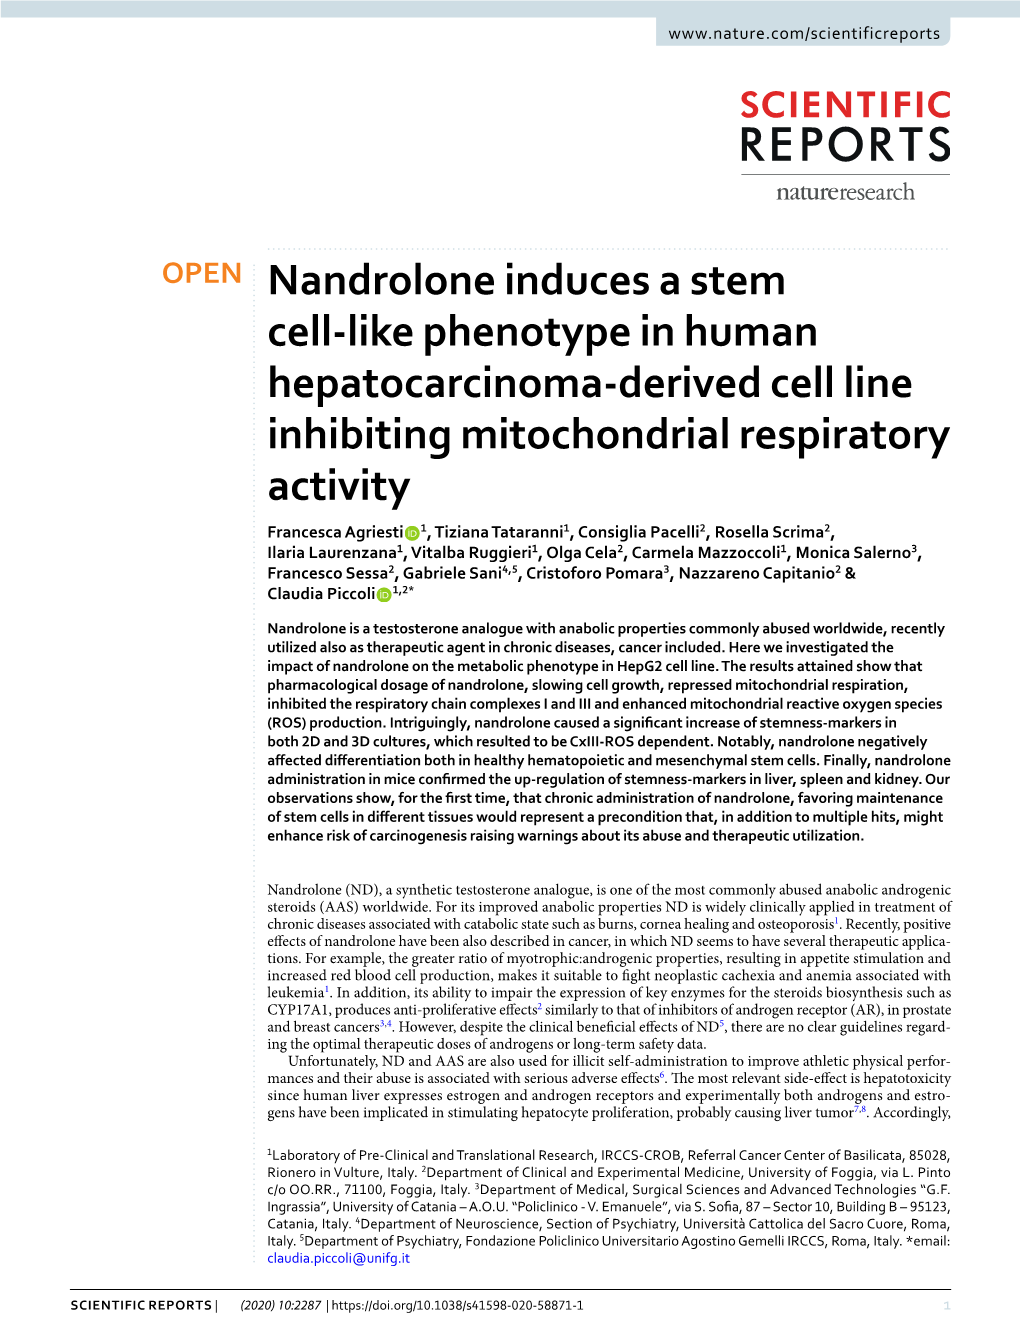 Nandrolone Induces a Stem Cell-Like Phenotype in Human